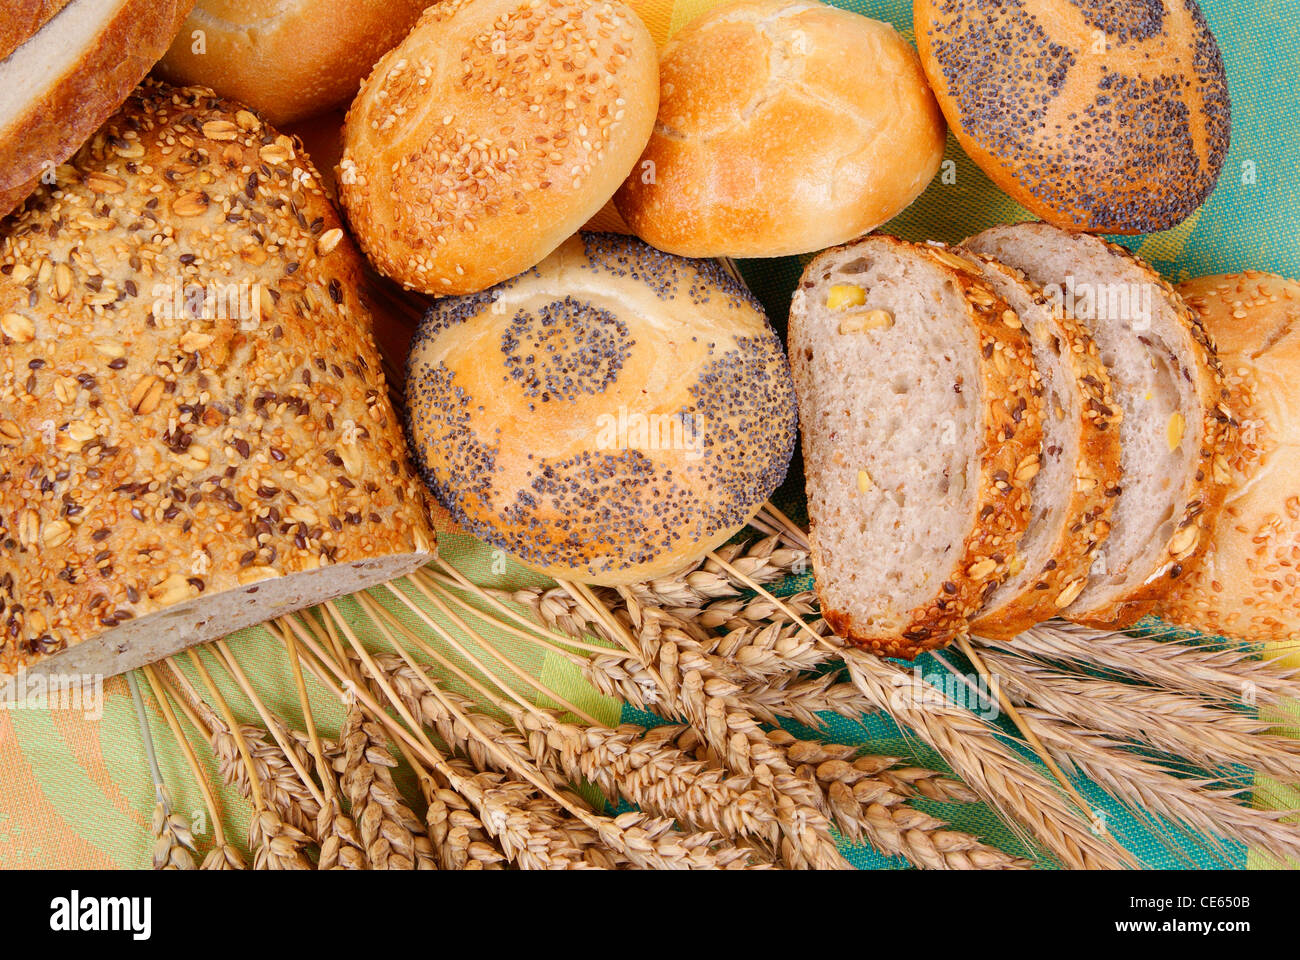 variable types of bread and rolls as background Stock Photo